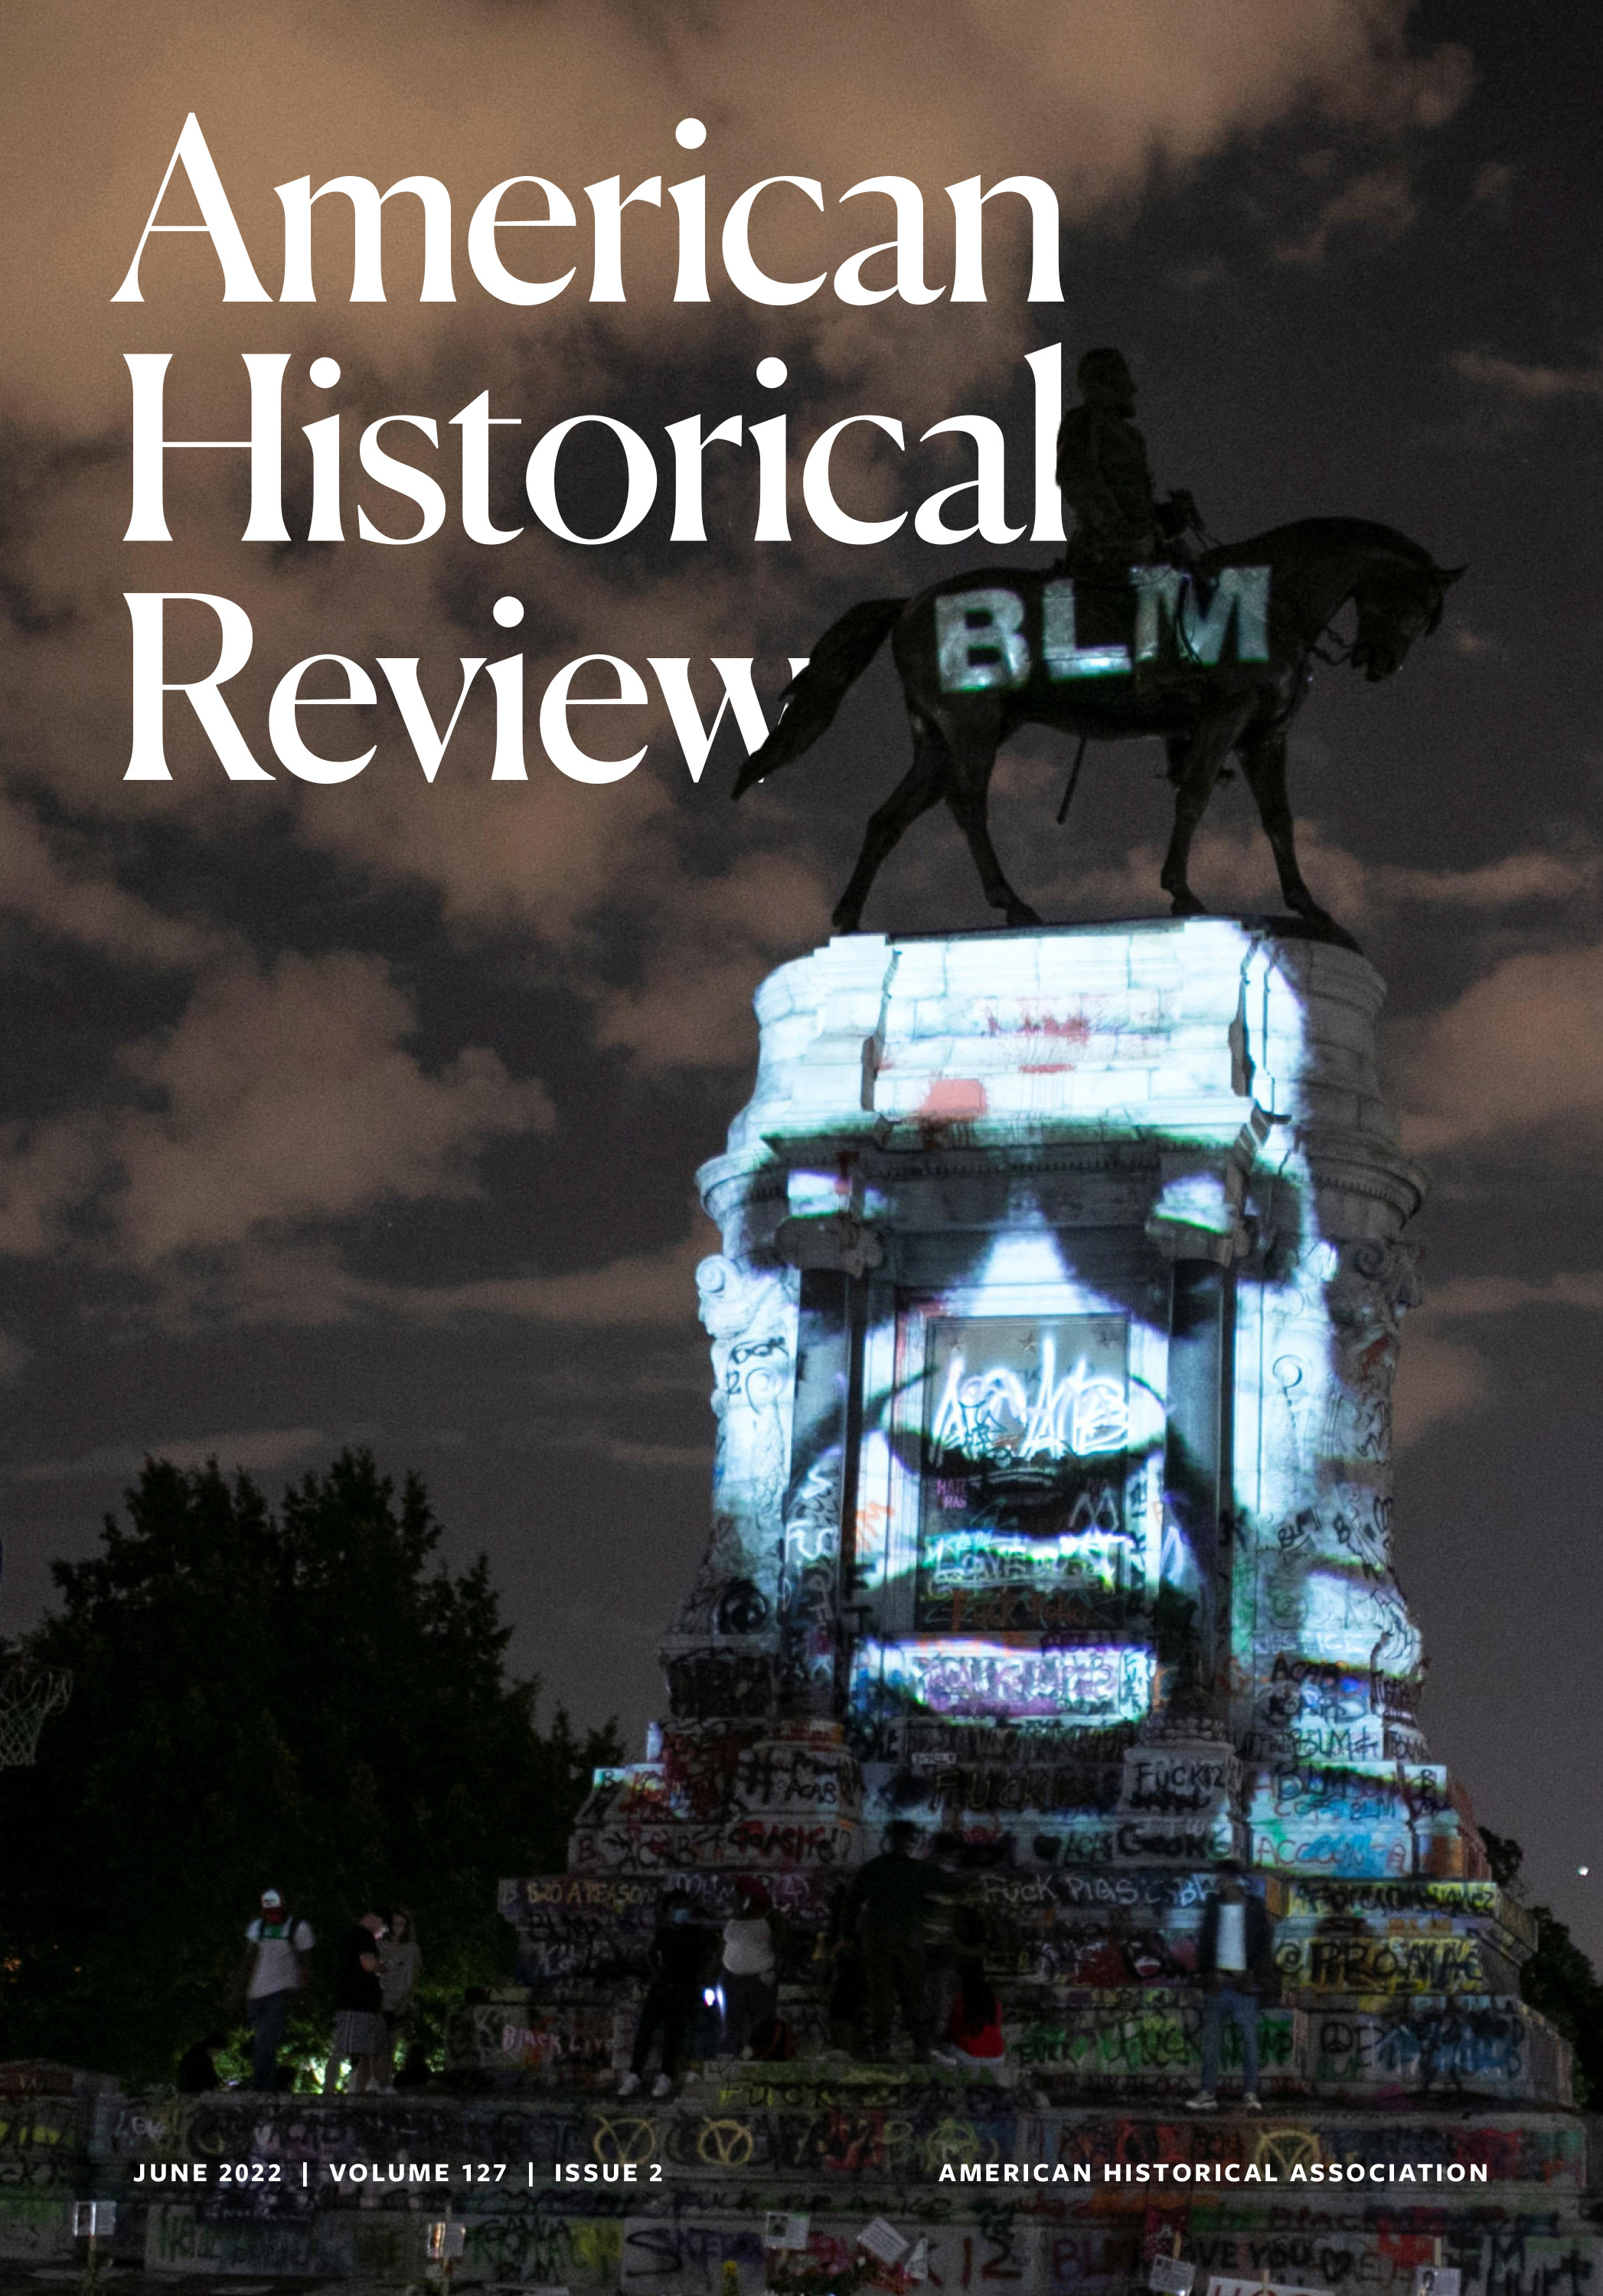 Cover of the June 2022 issue of the American Historical Review